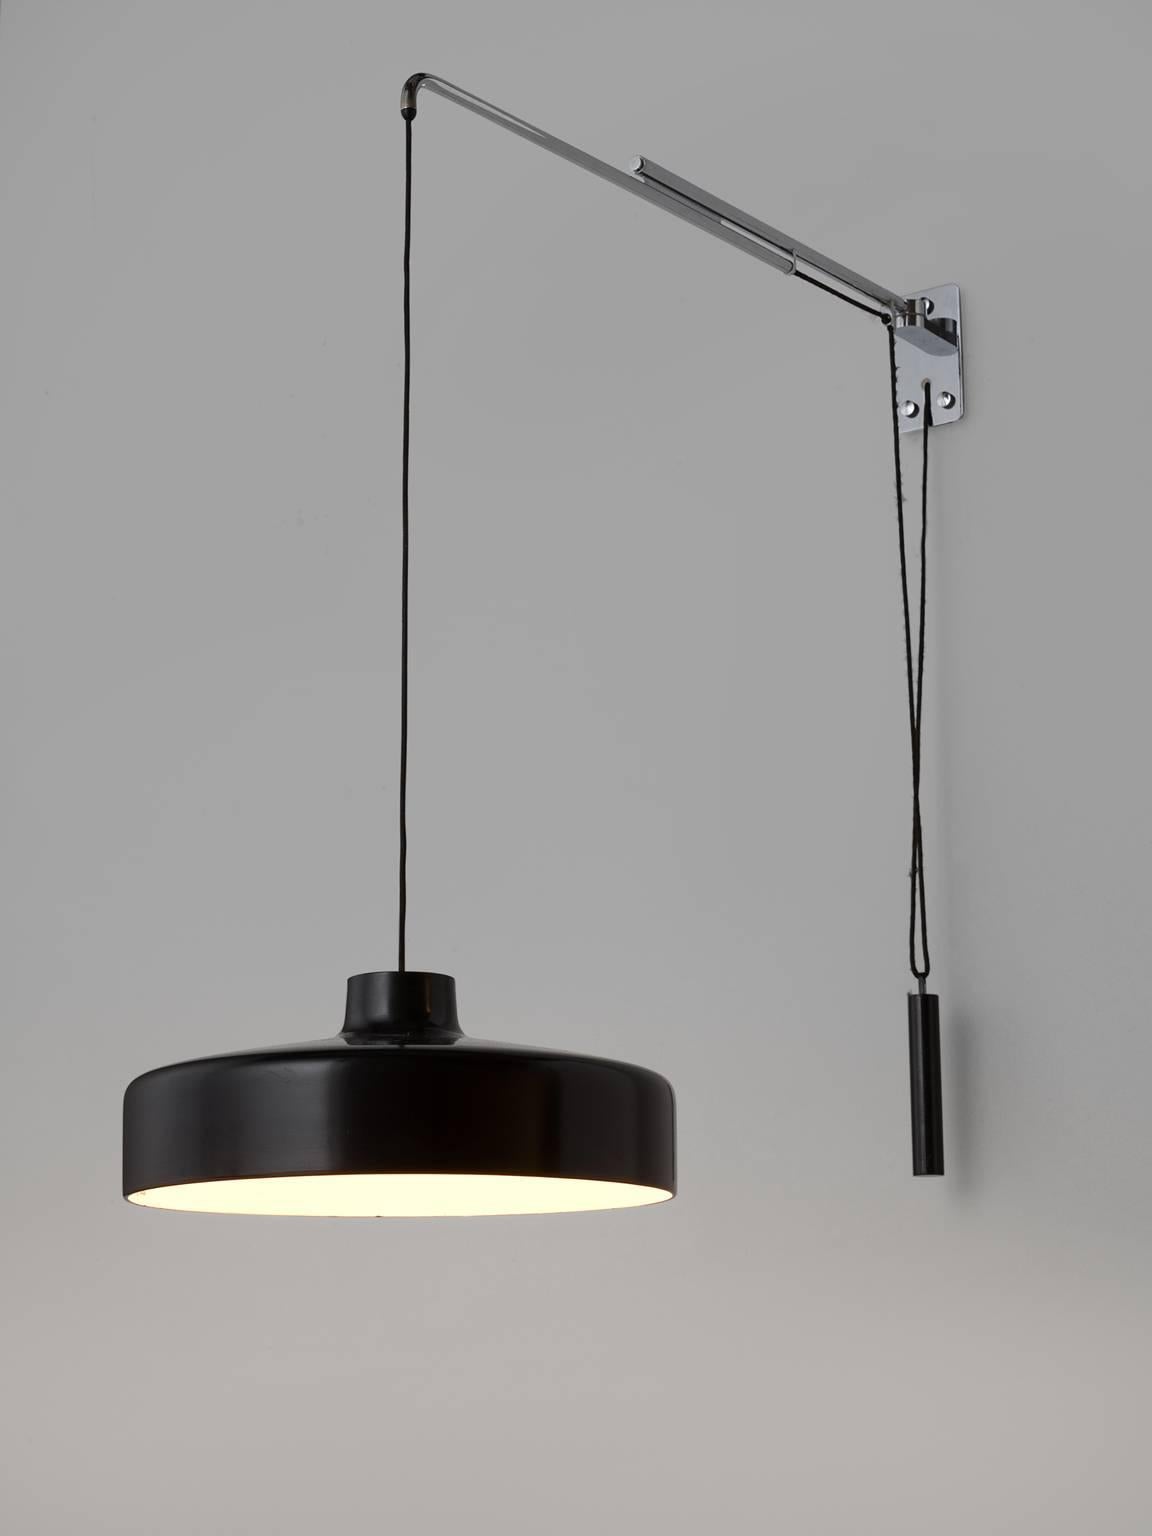 Gino Sarfatti for Arteluce, '194/N', black pendant, metal, wire, Italy, 1950.

This lamp with swivel arm features a chrome counterweight; the shade is is executed in lacquered aluminum. This exceptional pendant by Arteluce features a counterweight